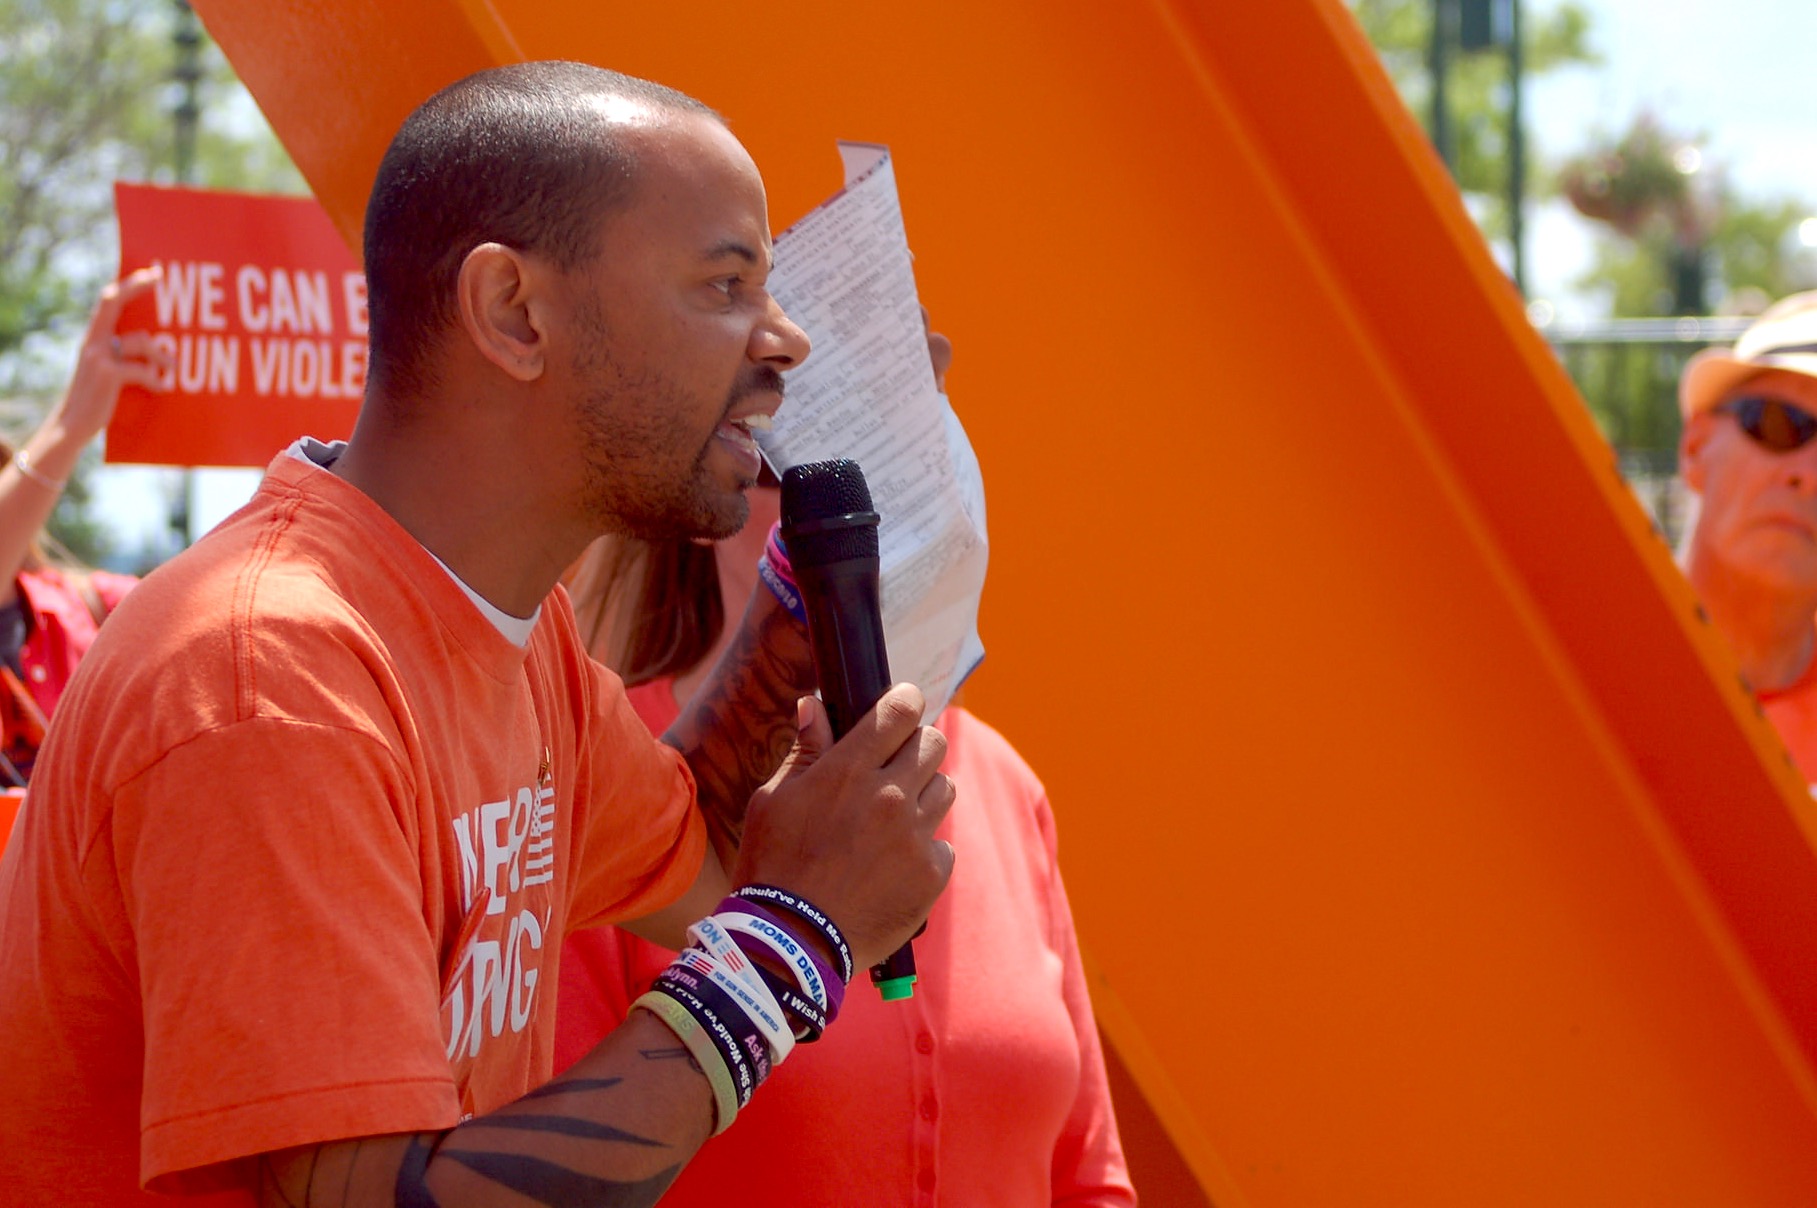 Khary Penebaker, a candidate for U.S. Congress, holds his mother’s death certificate as he tells a crowd at a gun violence awareness rally about her suicide in 1979. (Photo by Brendan O’Brien)